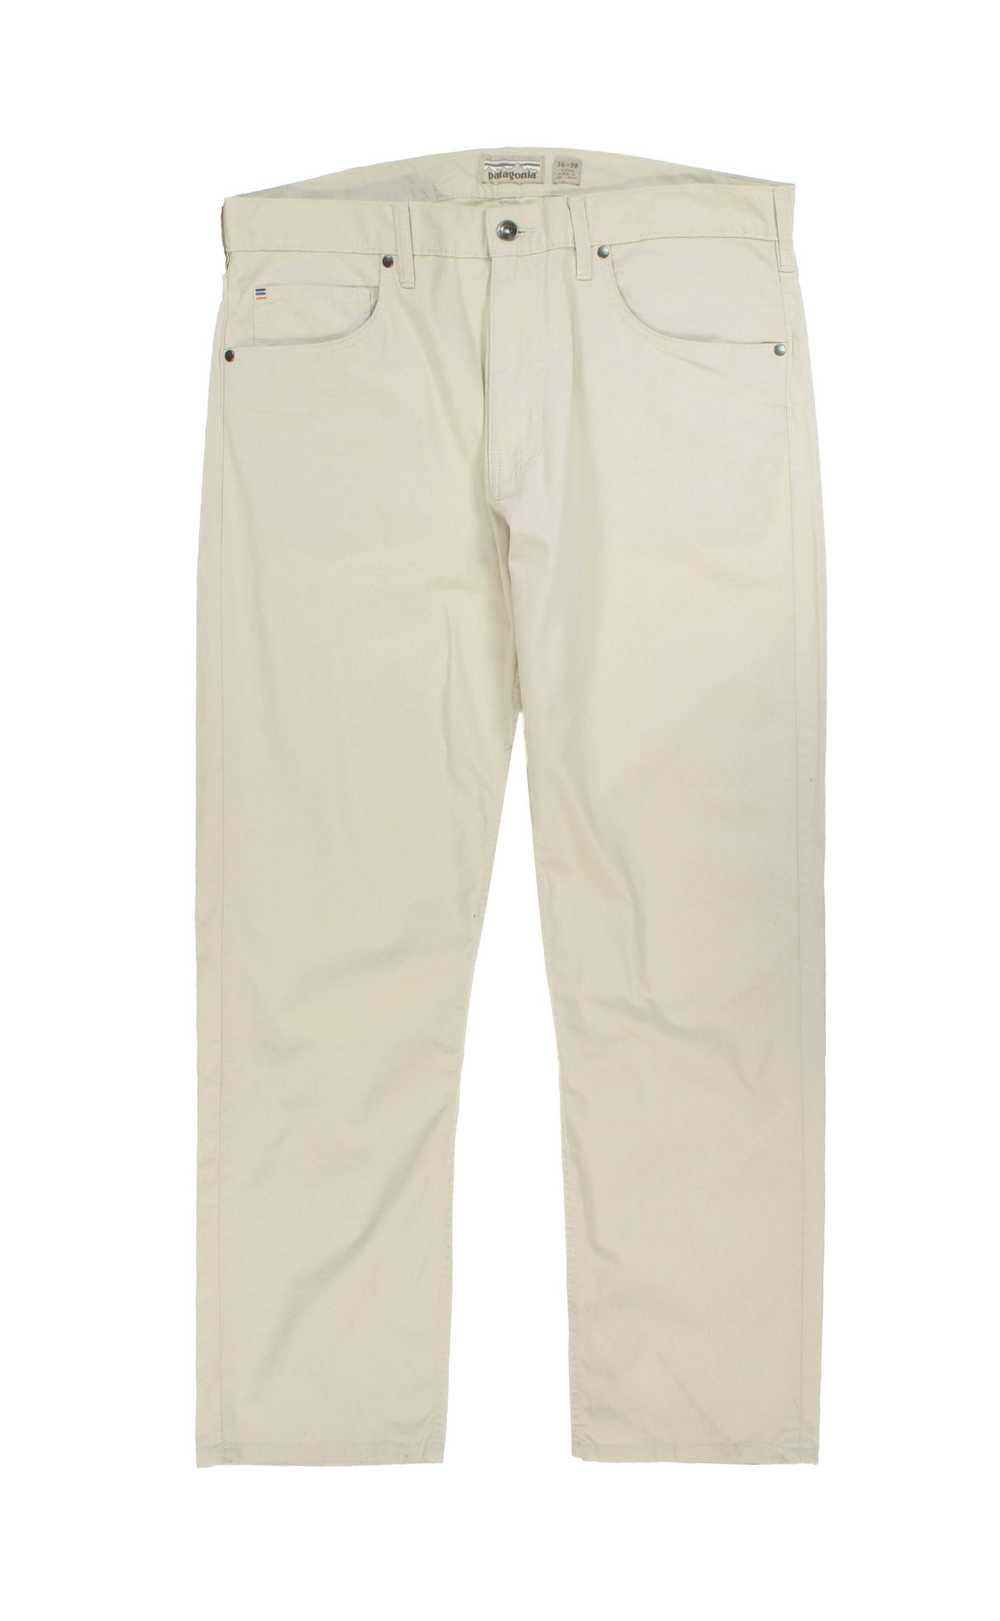 Patagonia - M's Straight Fit All-Wear Jeans - image 1